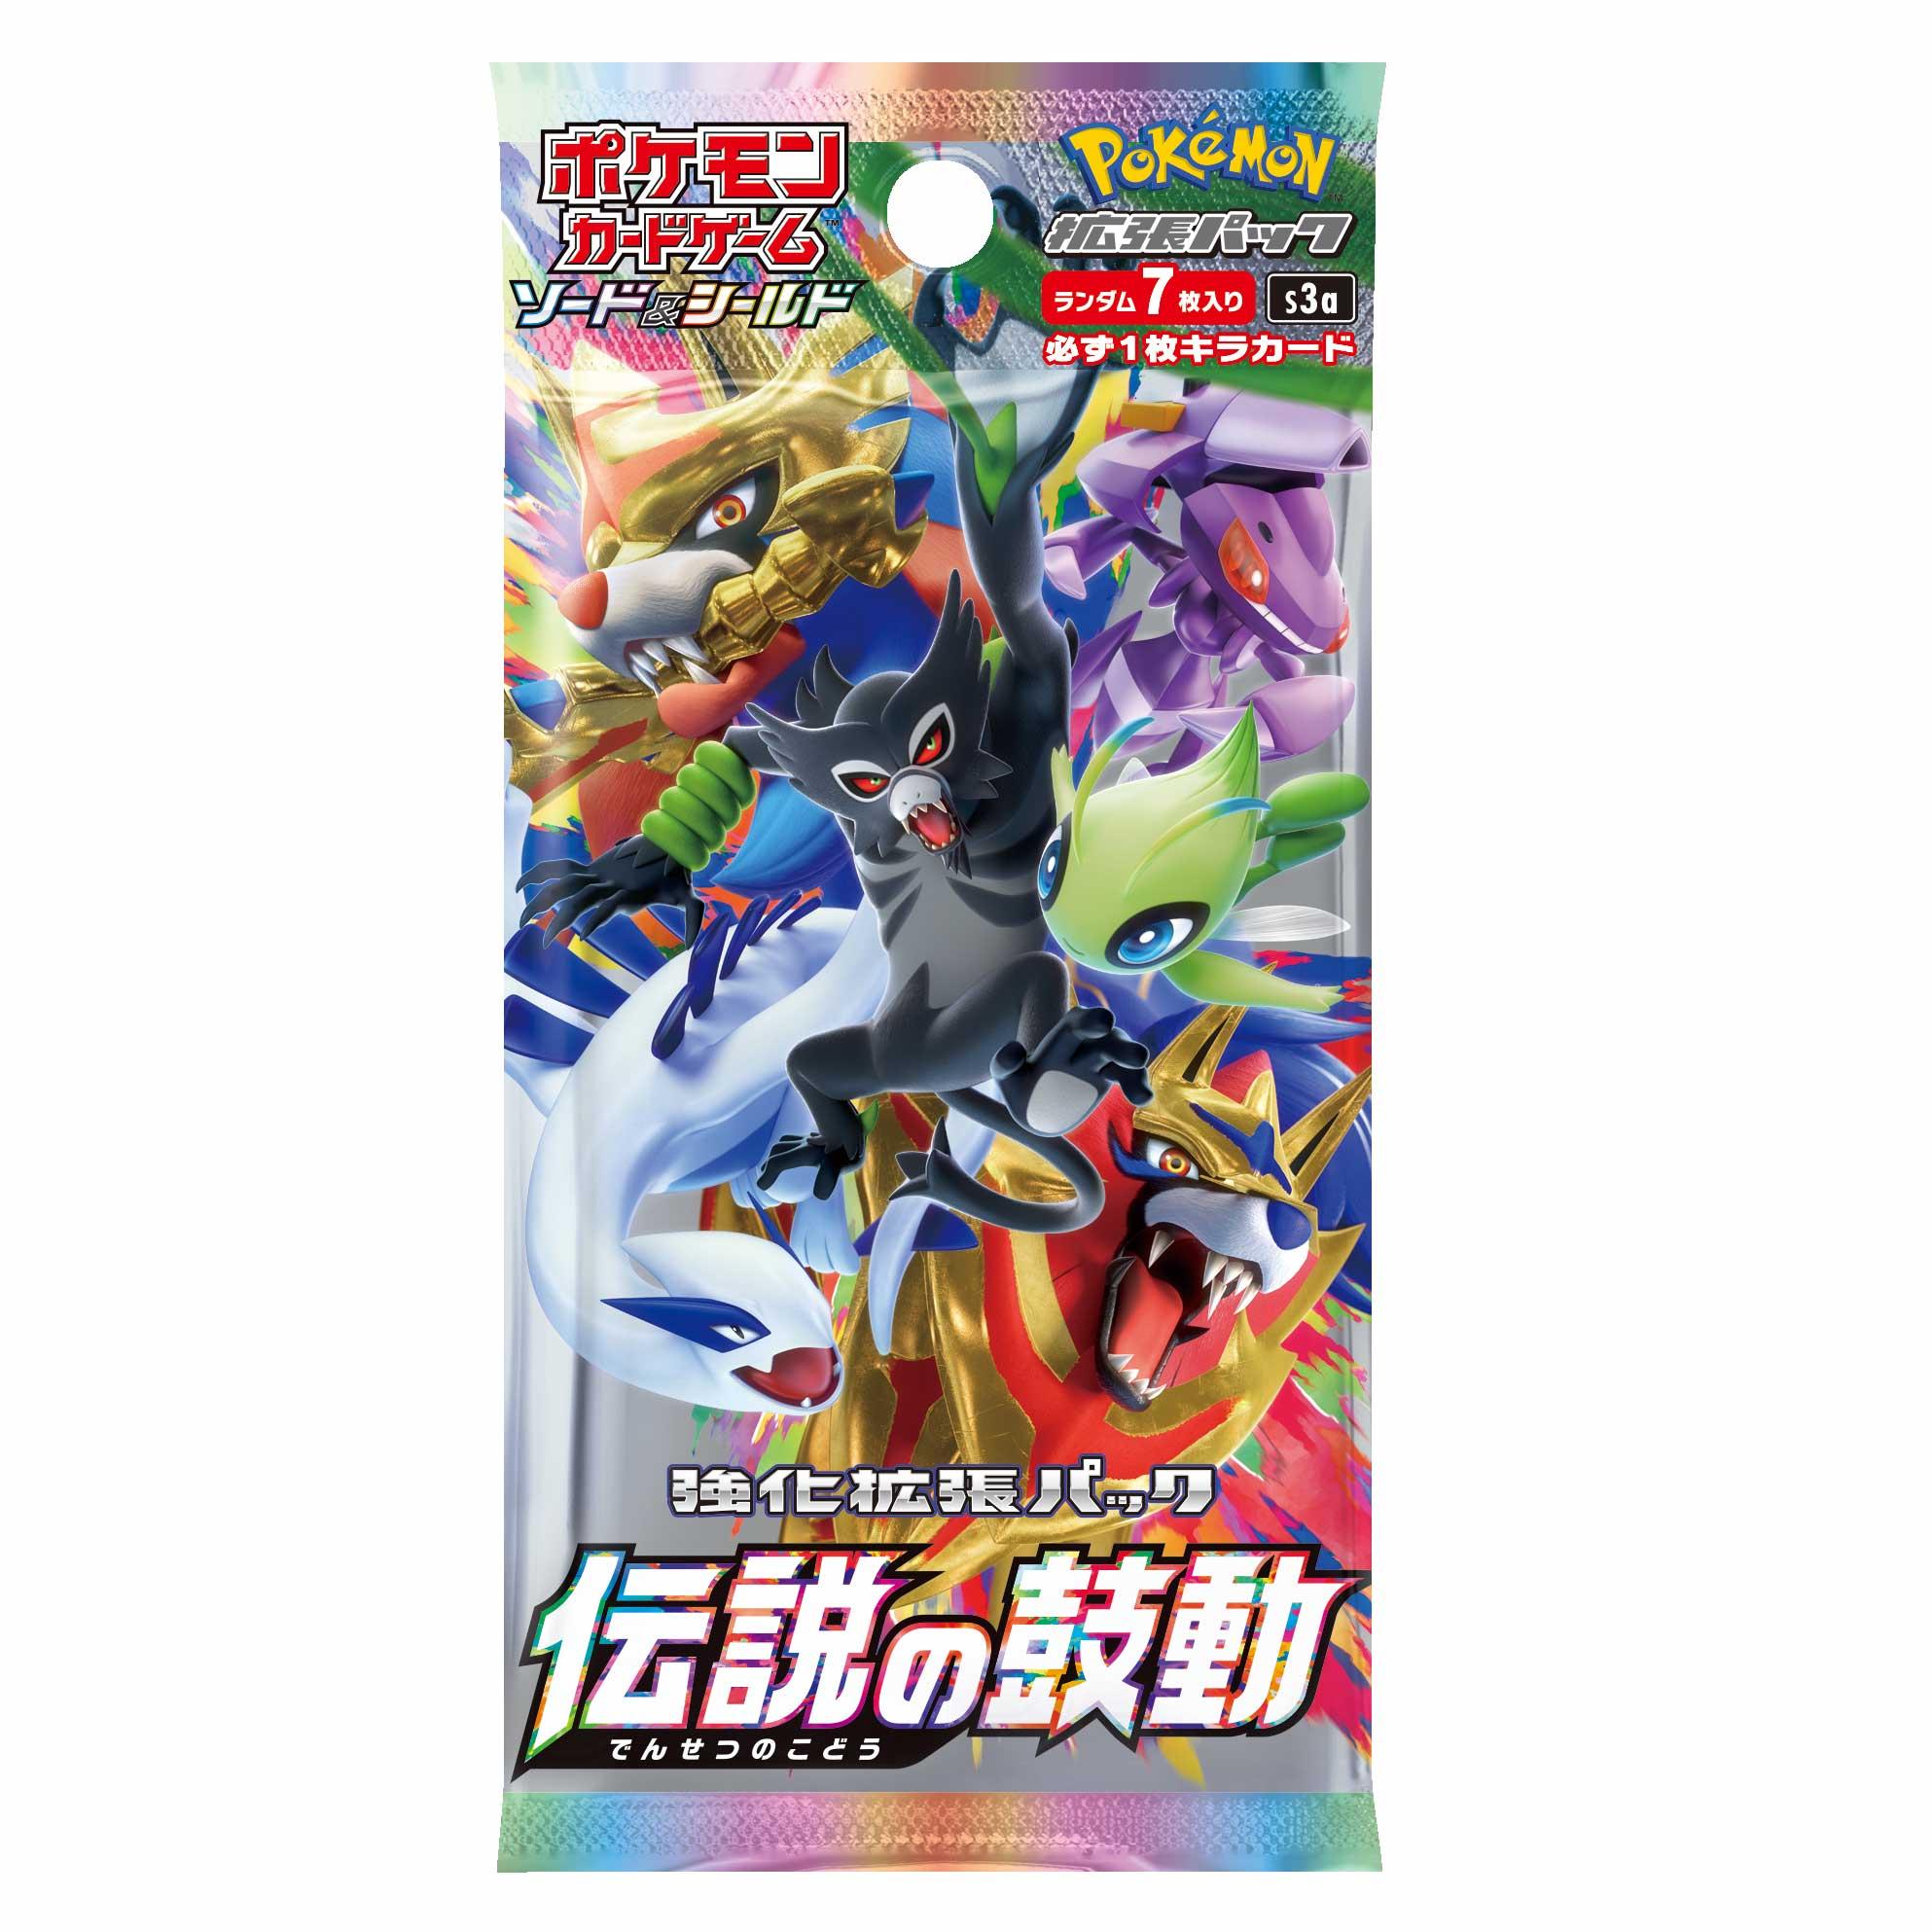 PREORDER [S3a] POKÉMON CARD GAME Sword & Shield Expansion pack ｢Legendary Pulse｣ BOX